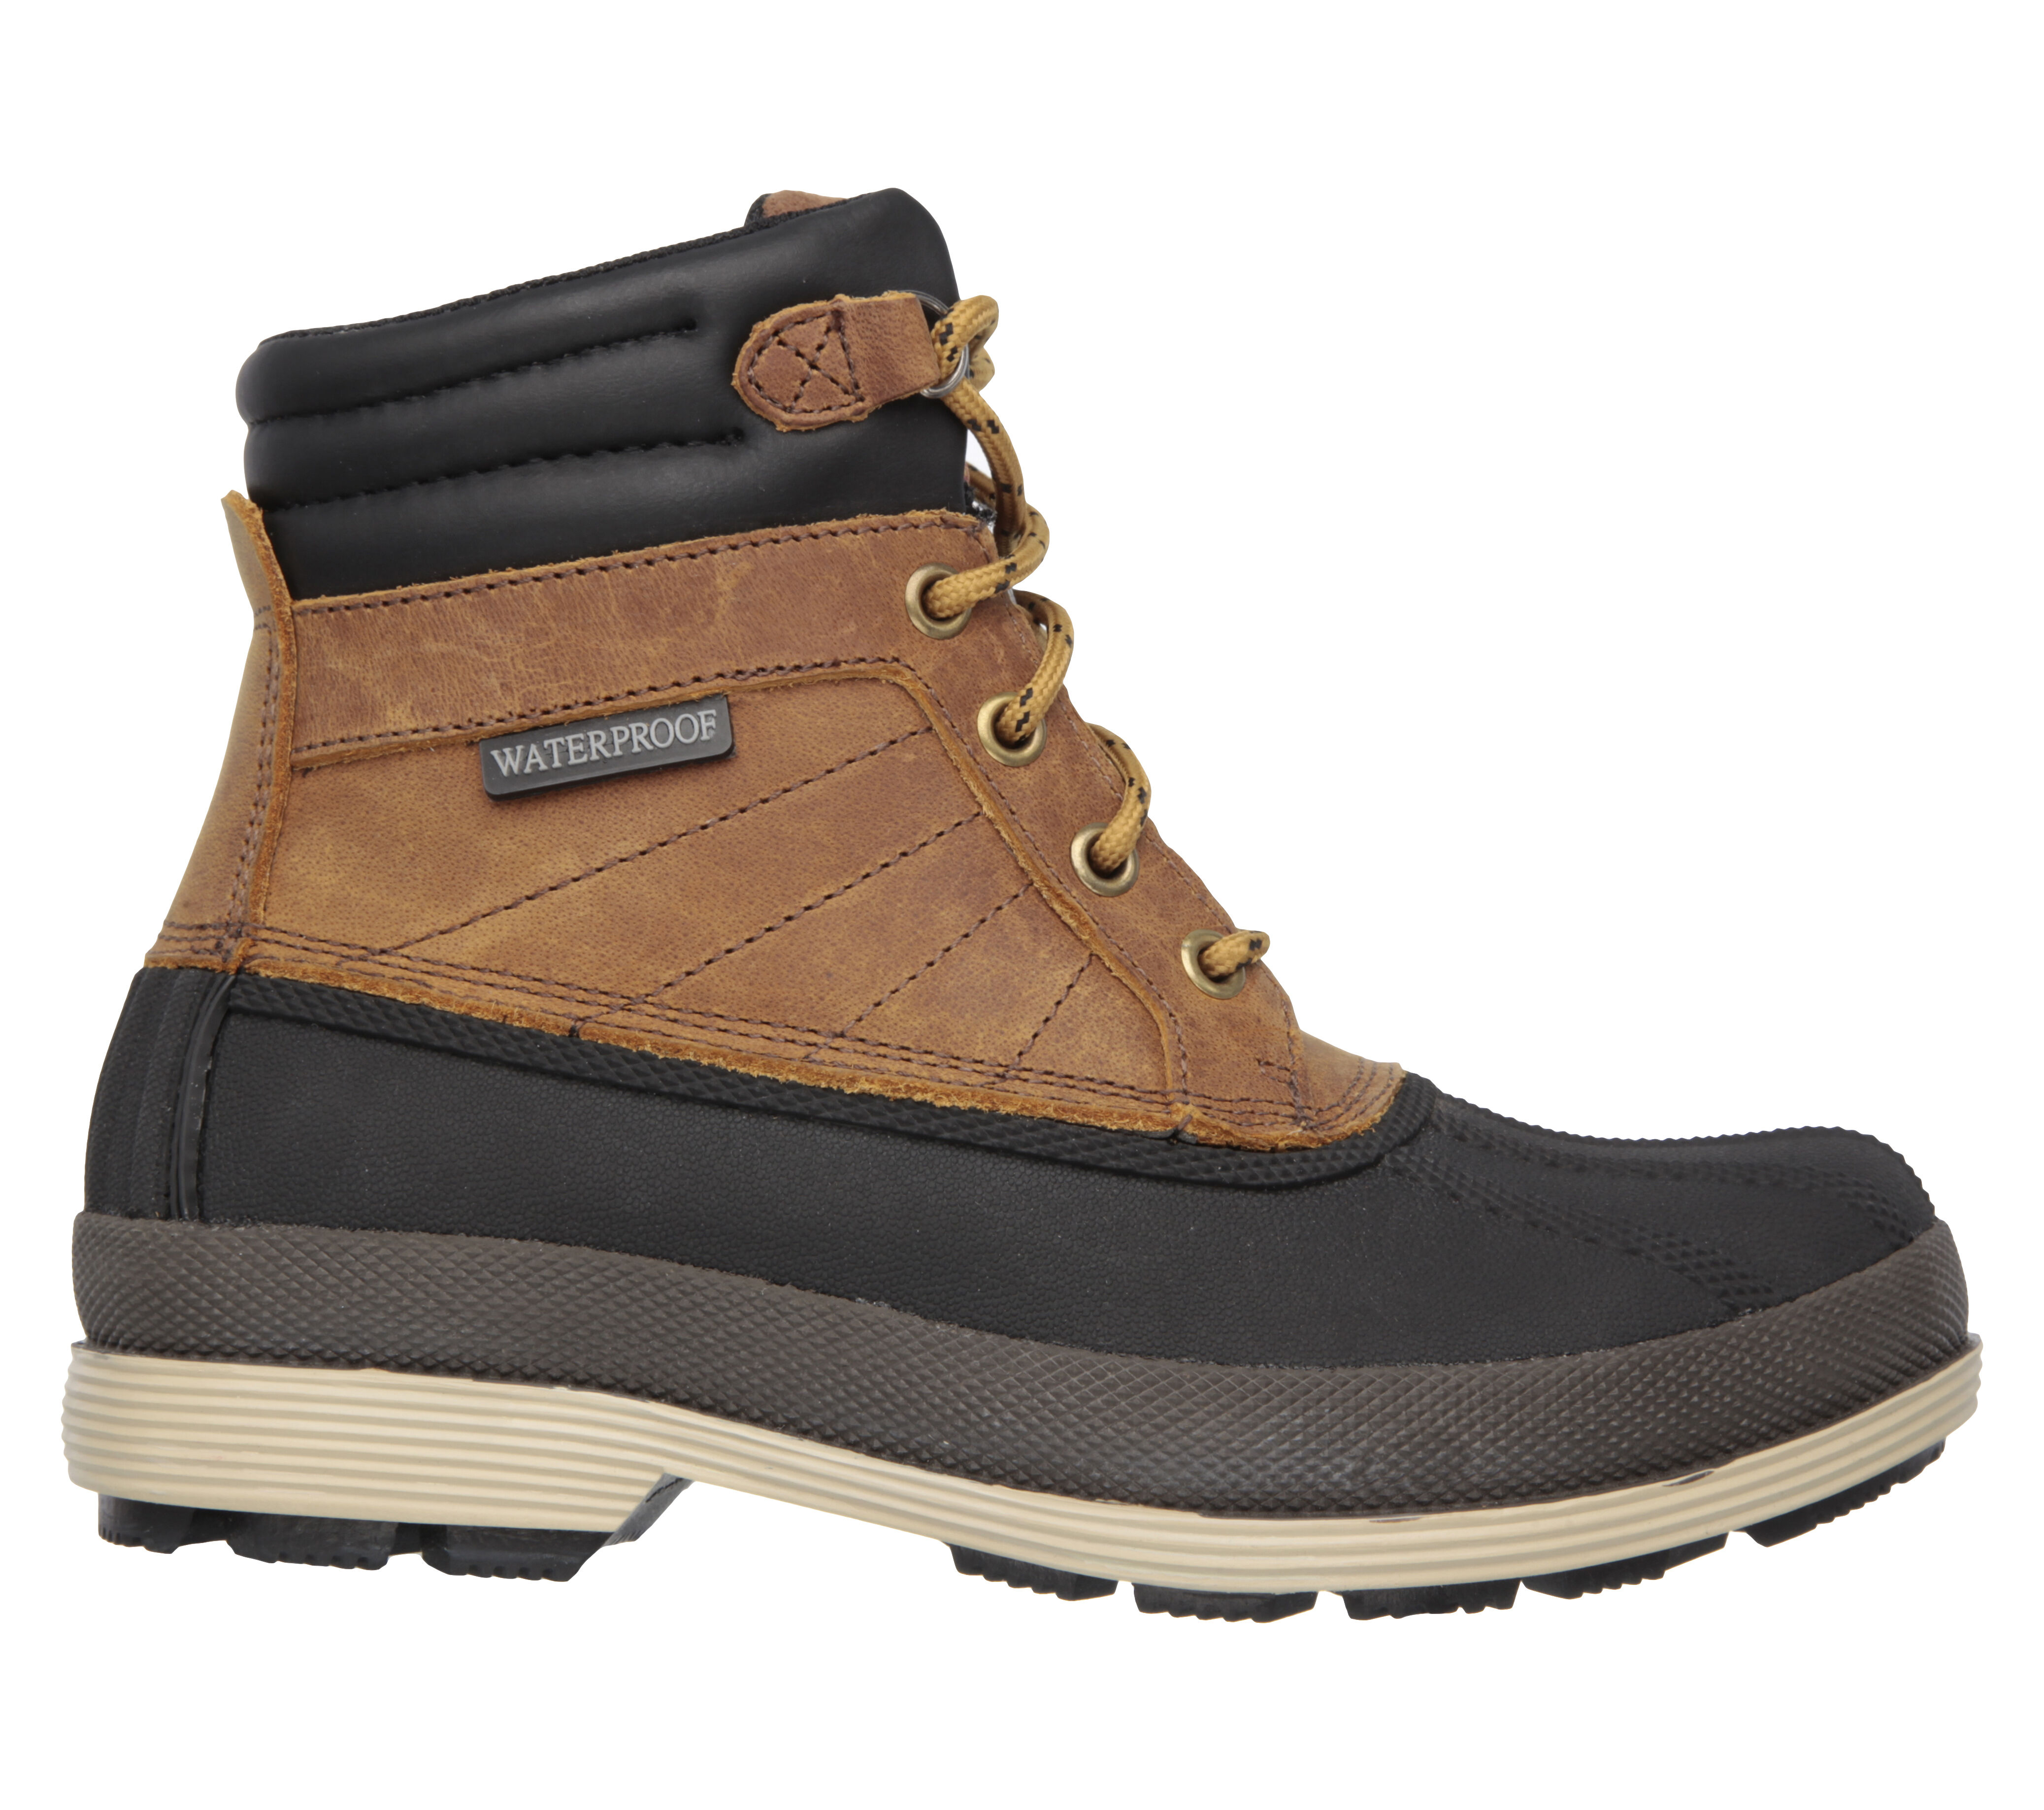 skechers insulated work boots